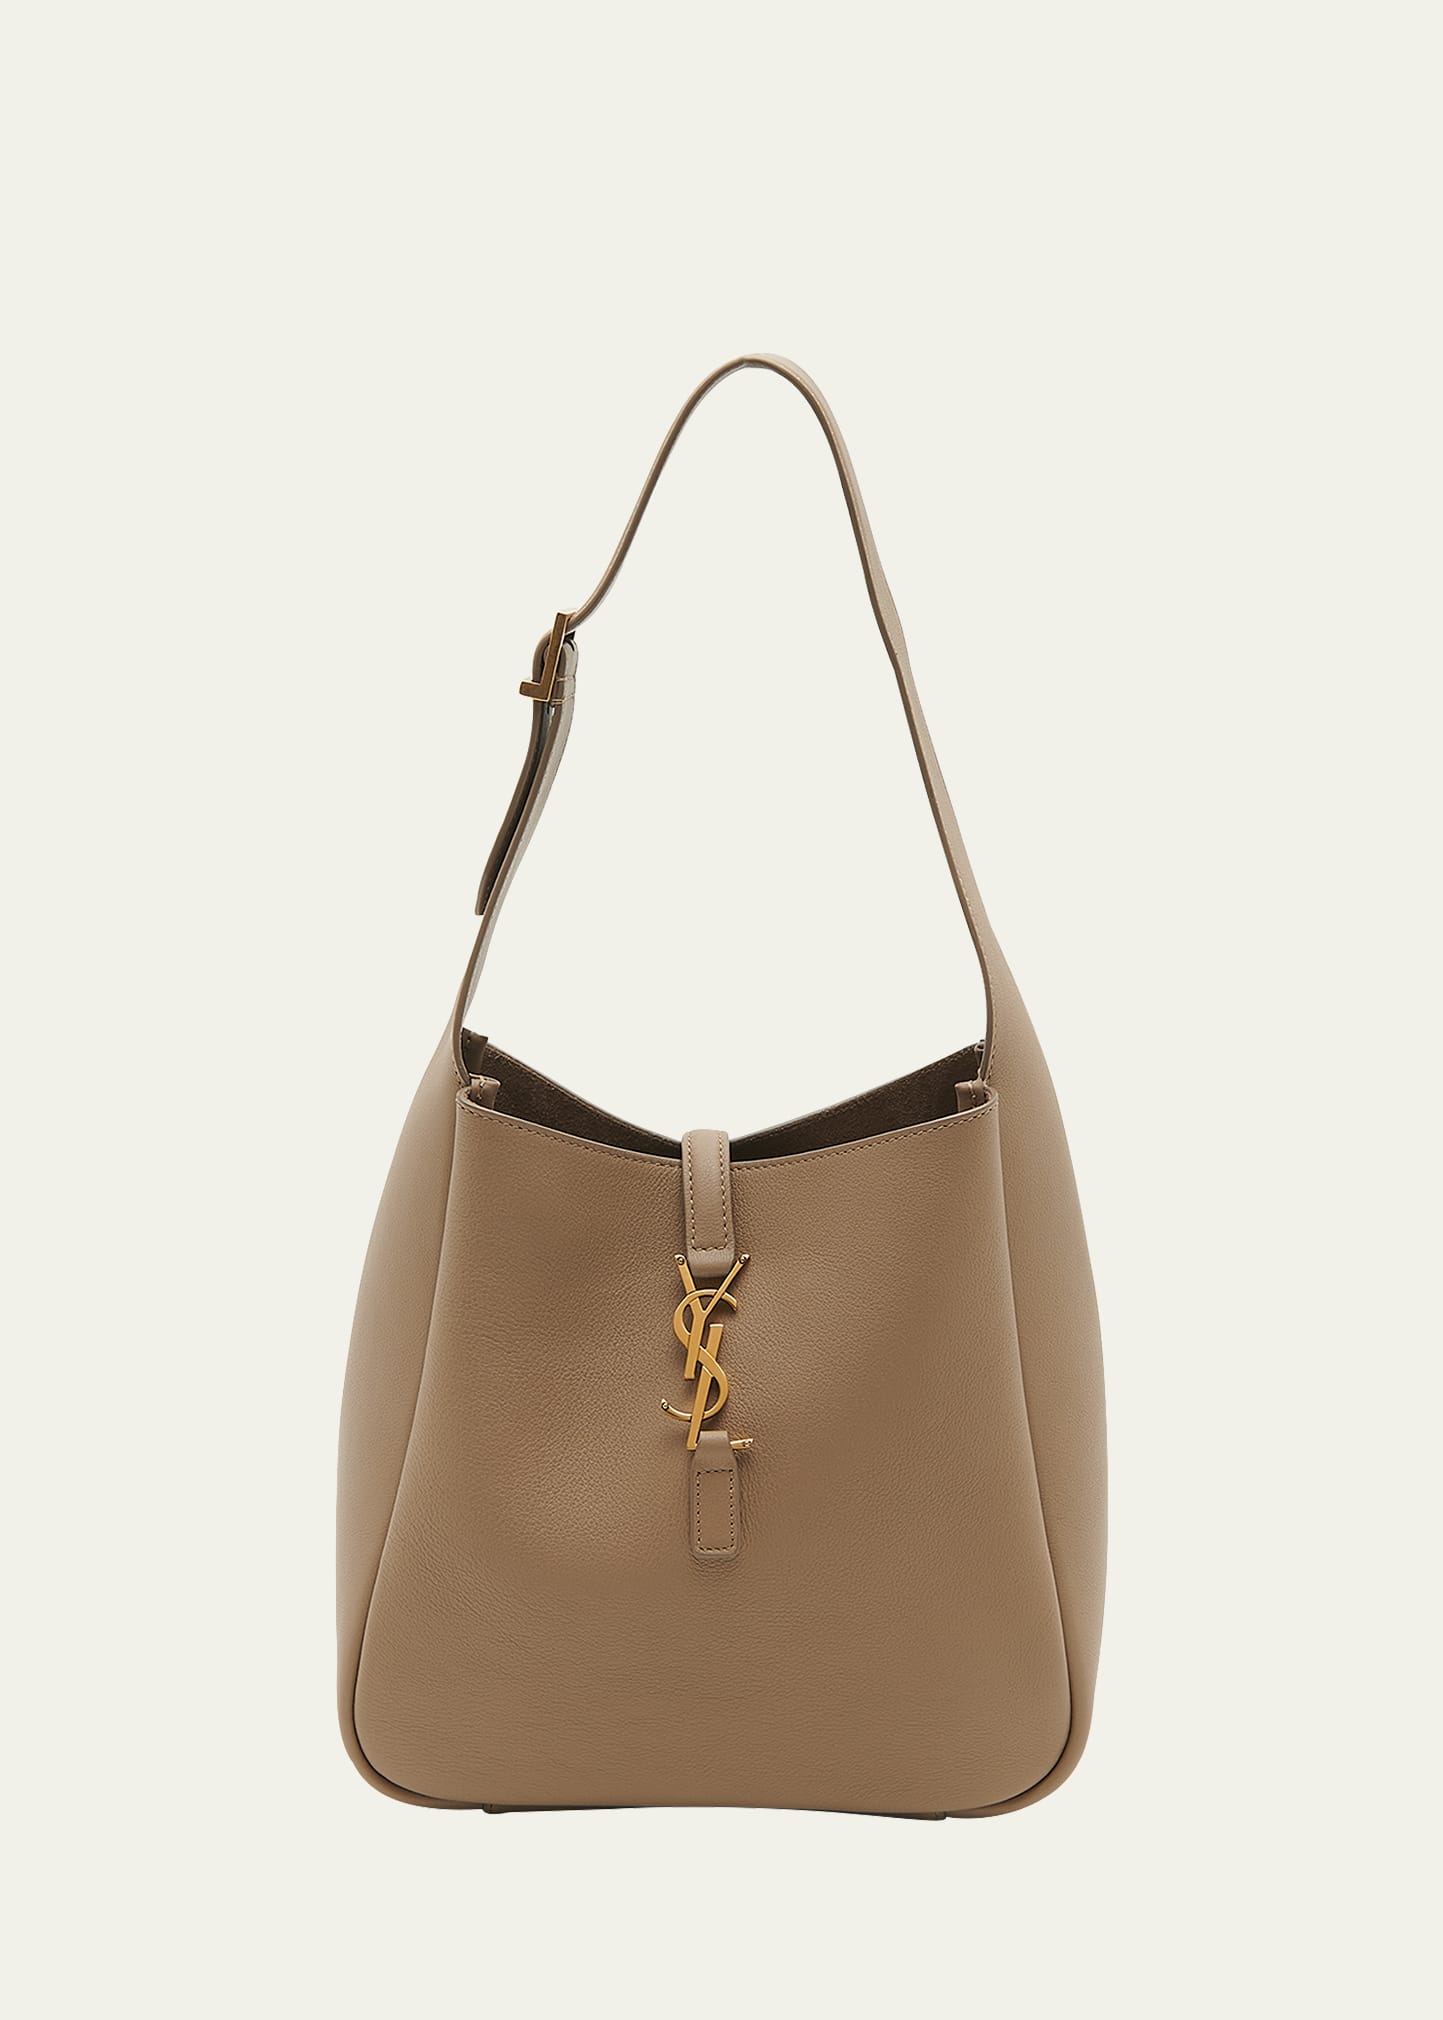 SAINT LAURENT LE 5 A 7 YSL SMALL HOBO IN SMOOTH SUPPLE LEATHER